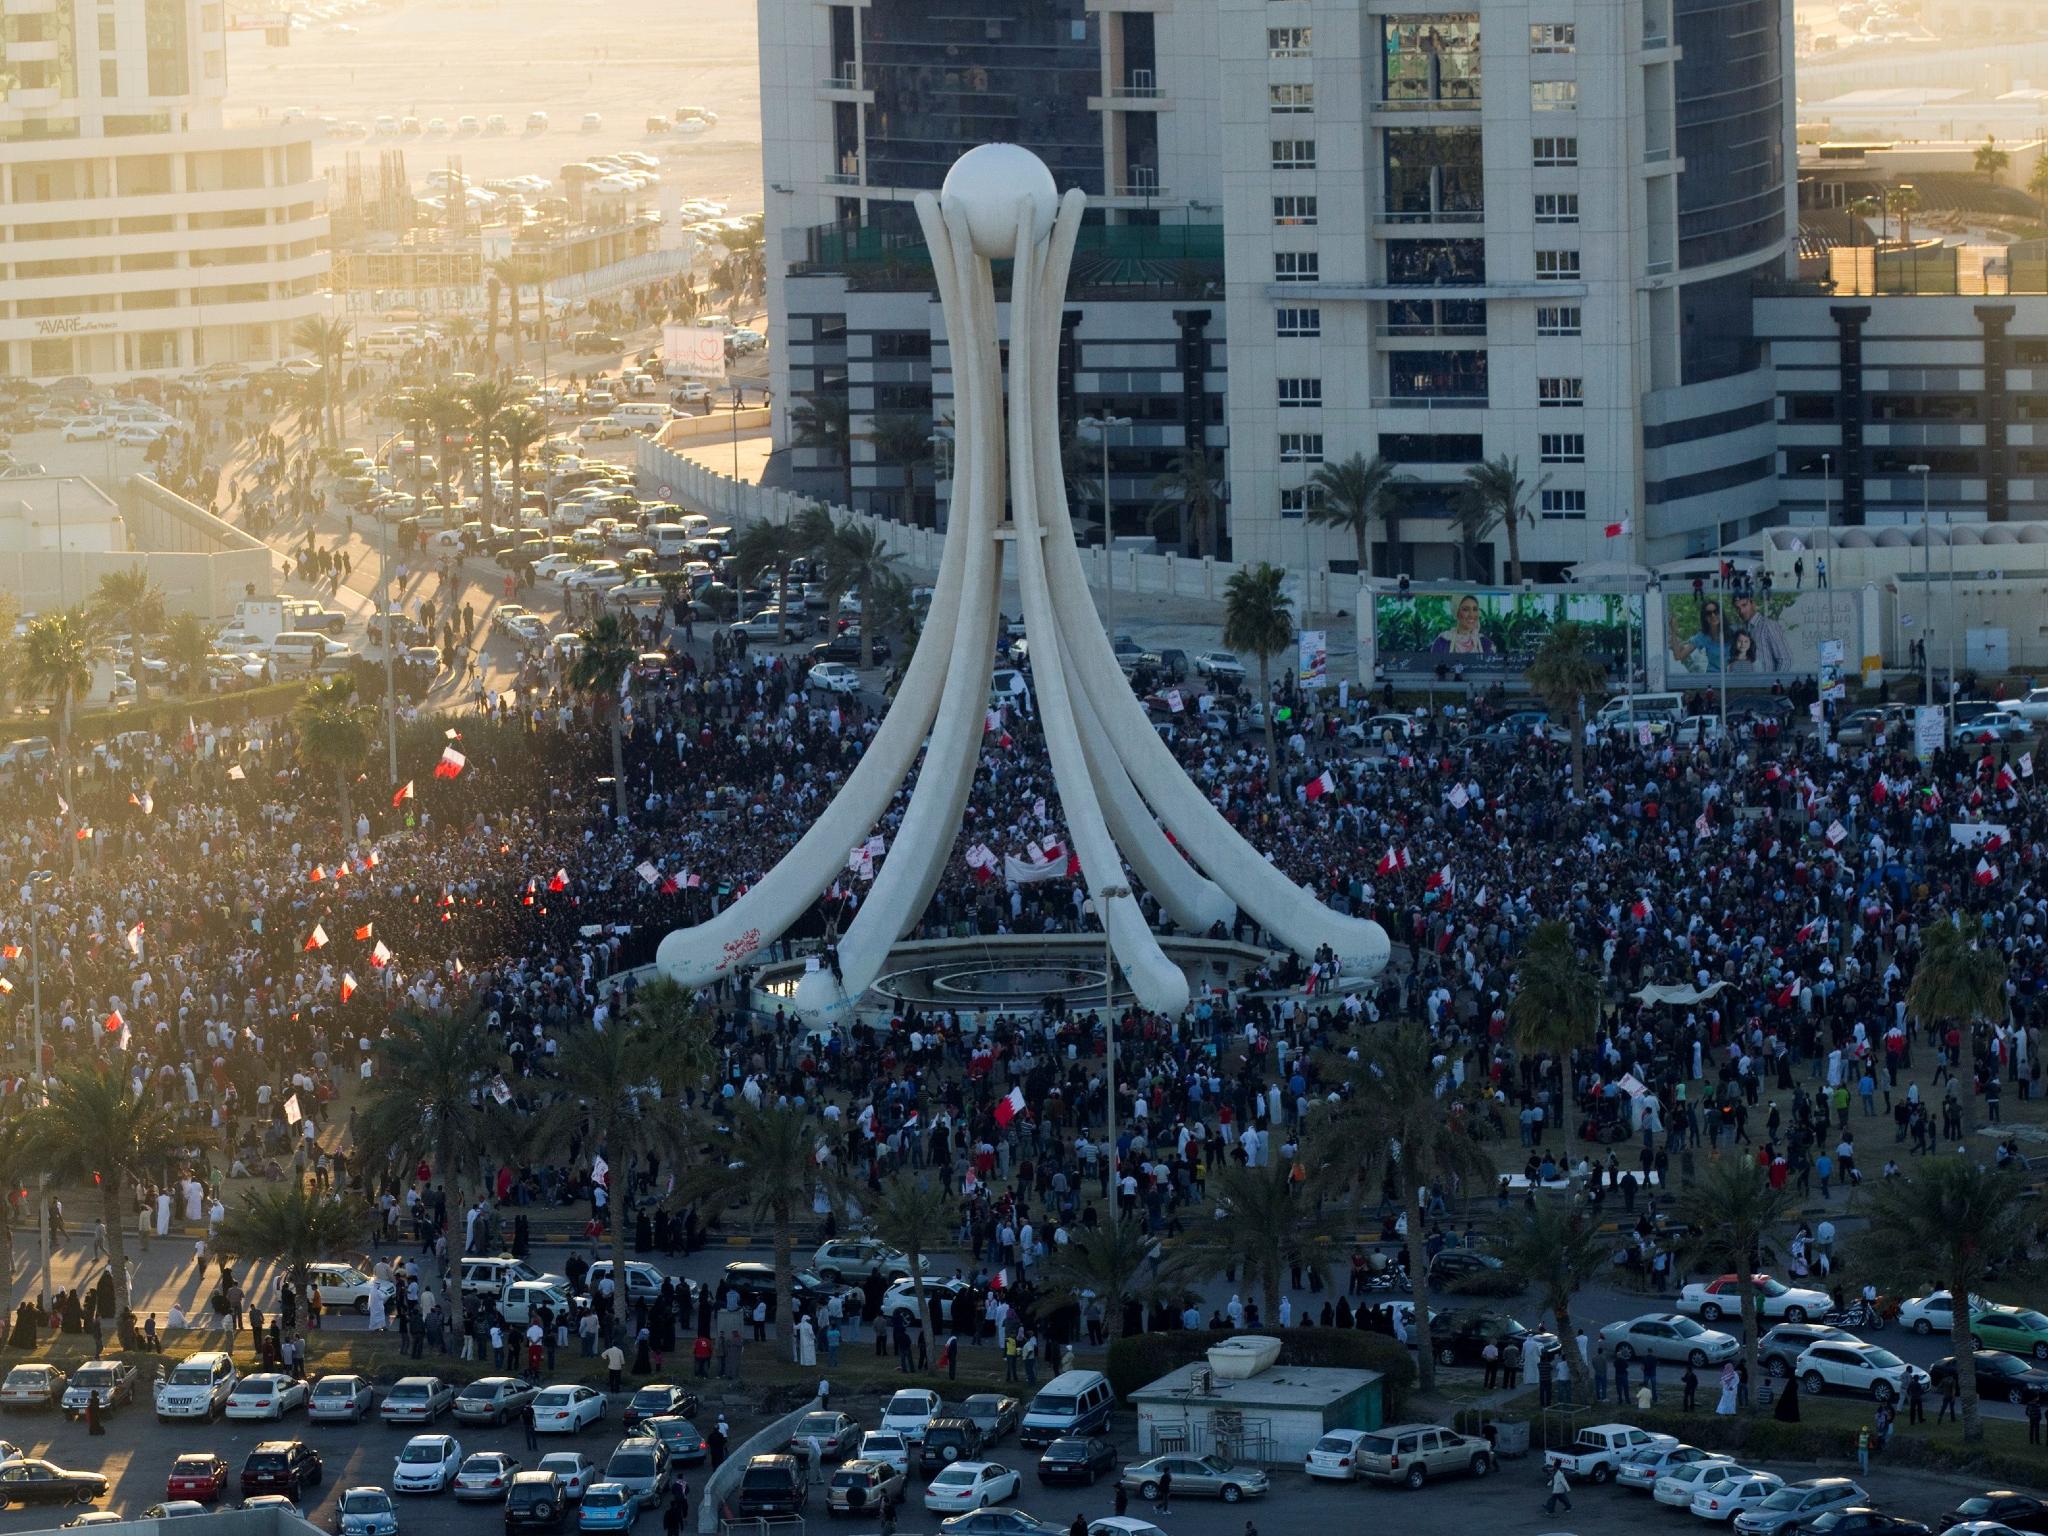 Protests in the country’s capital, Manama, in 2011